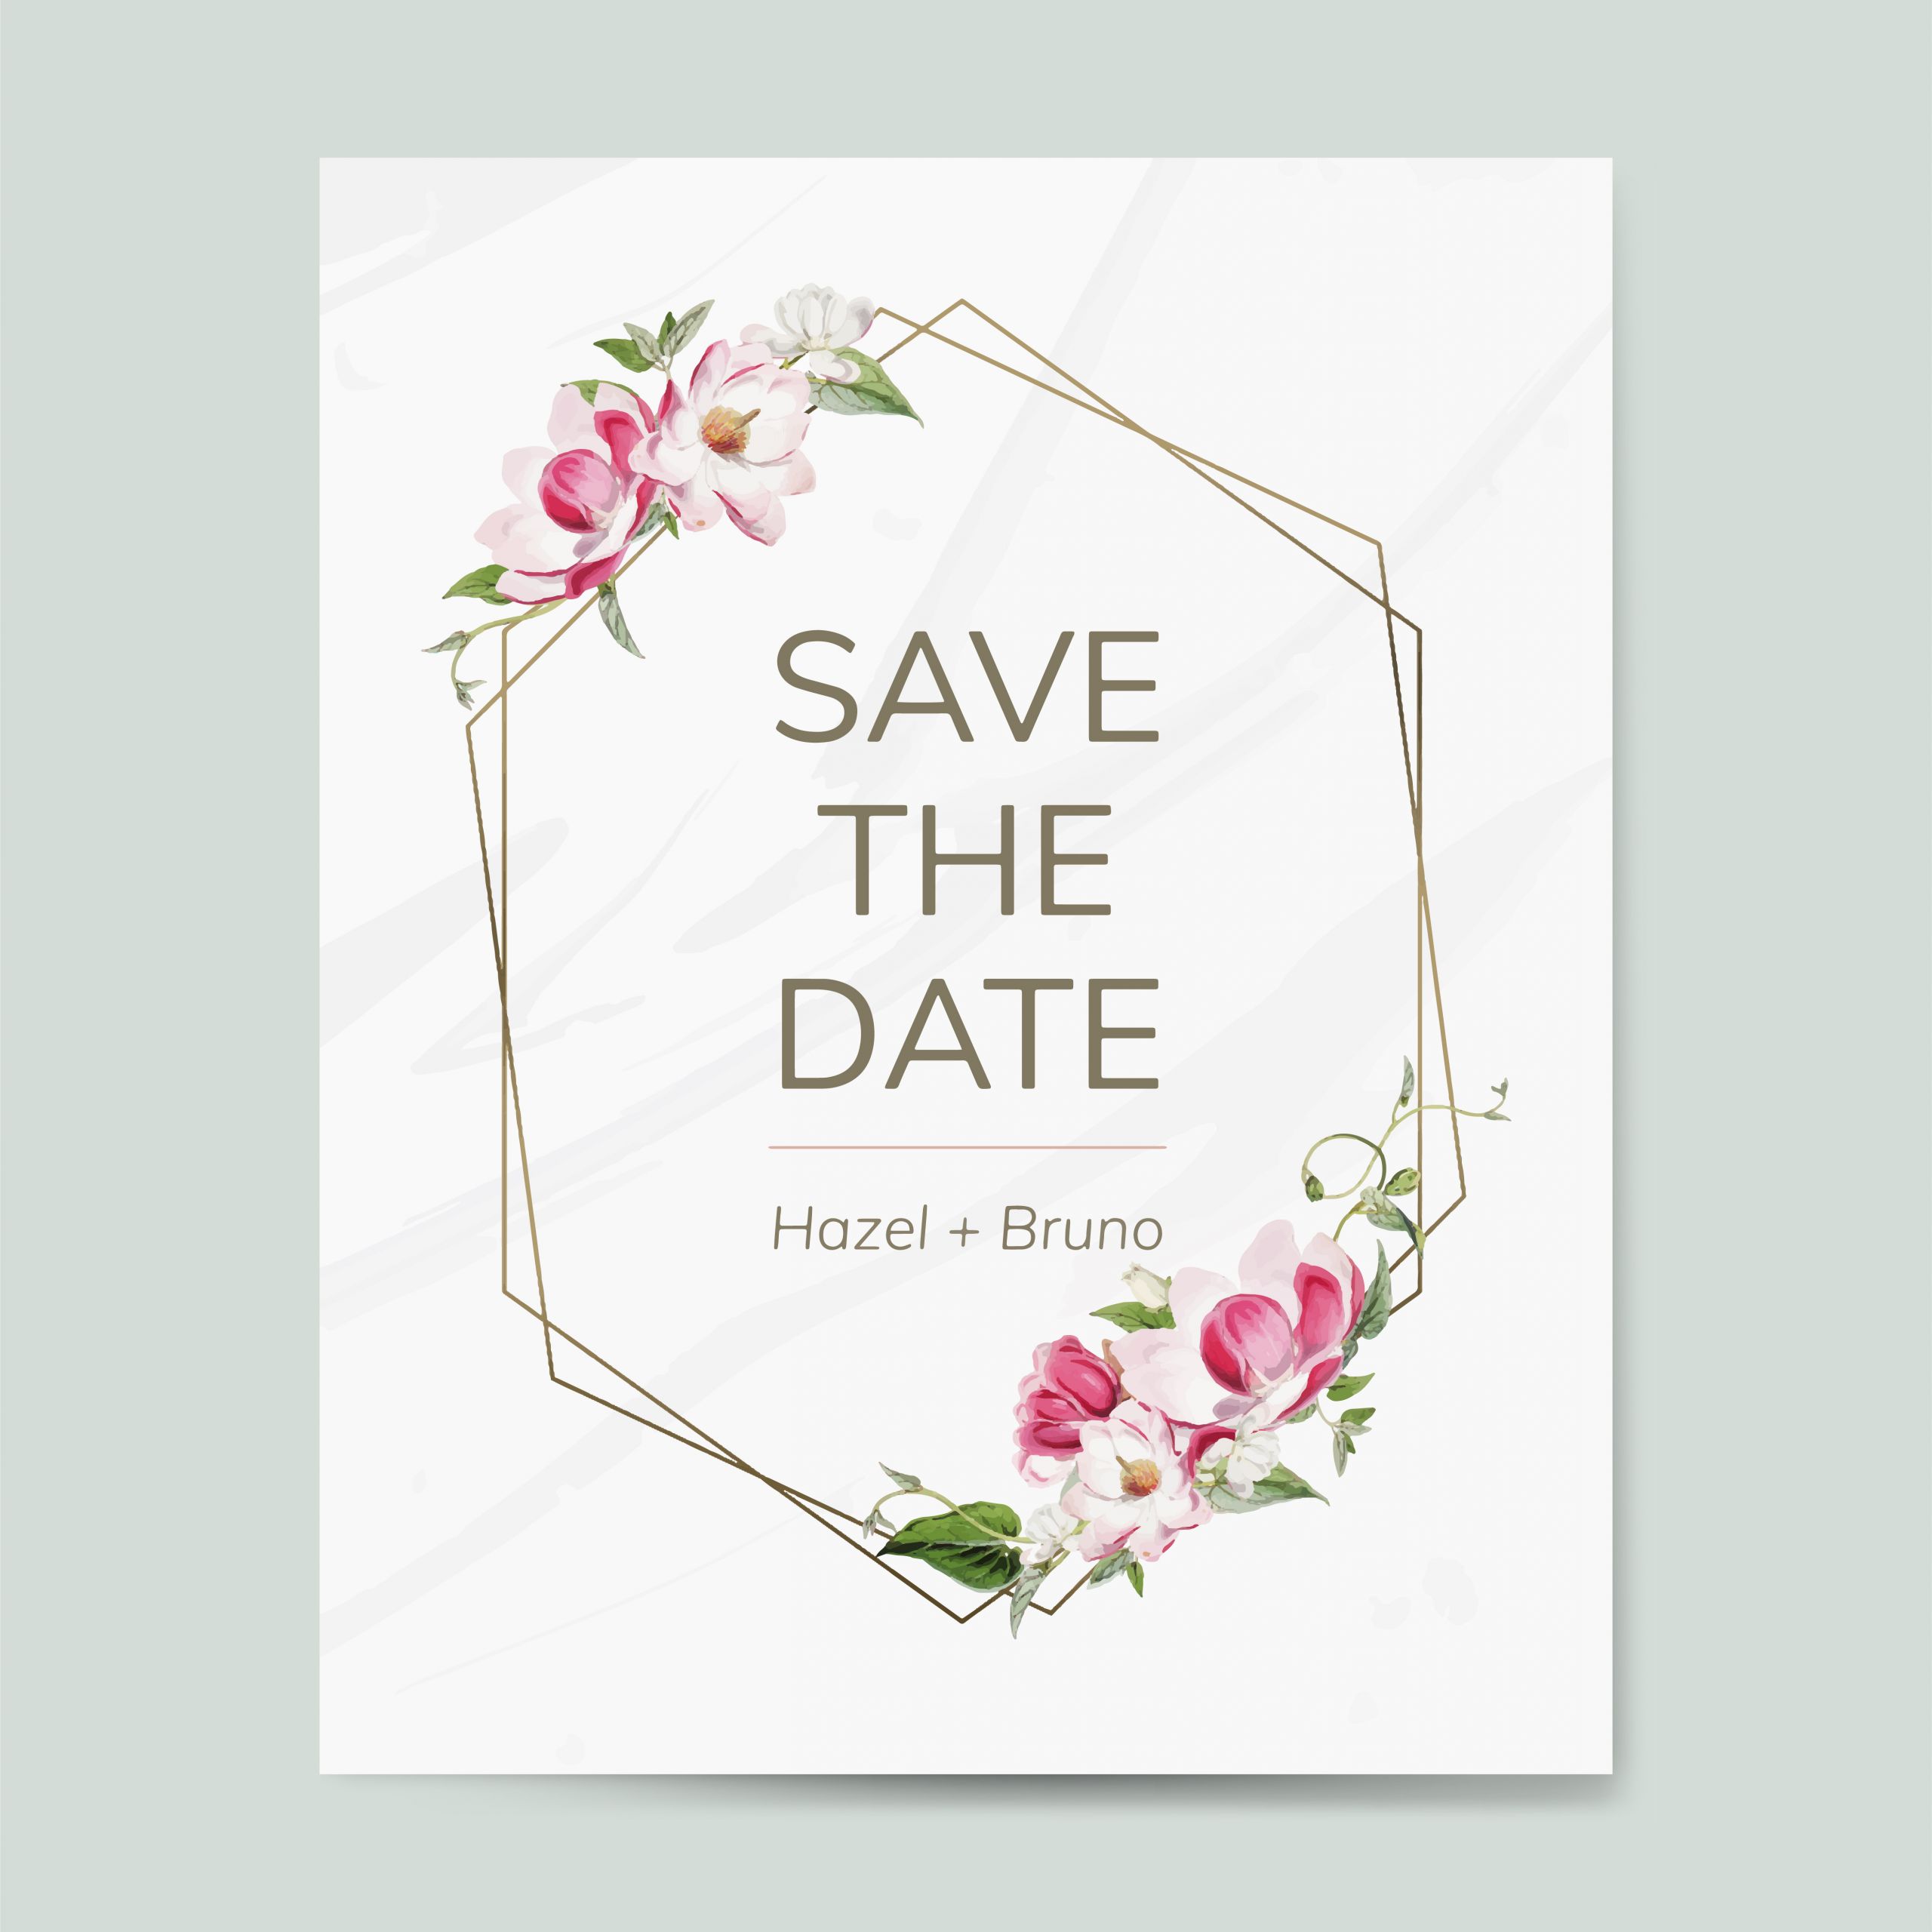 Save The Date And Wedding Invitations
 Save the date wedding invitation mockup vector Download